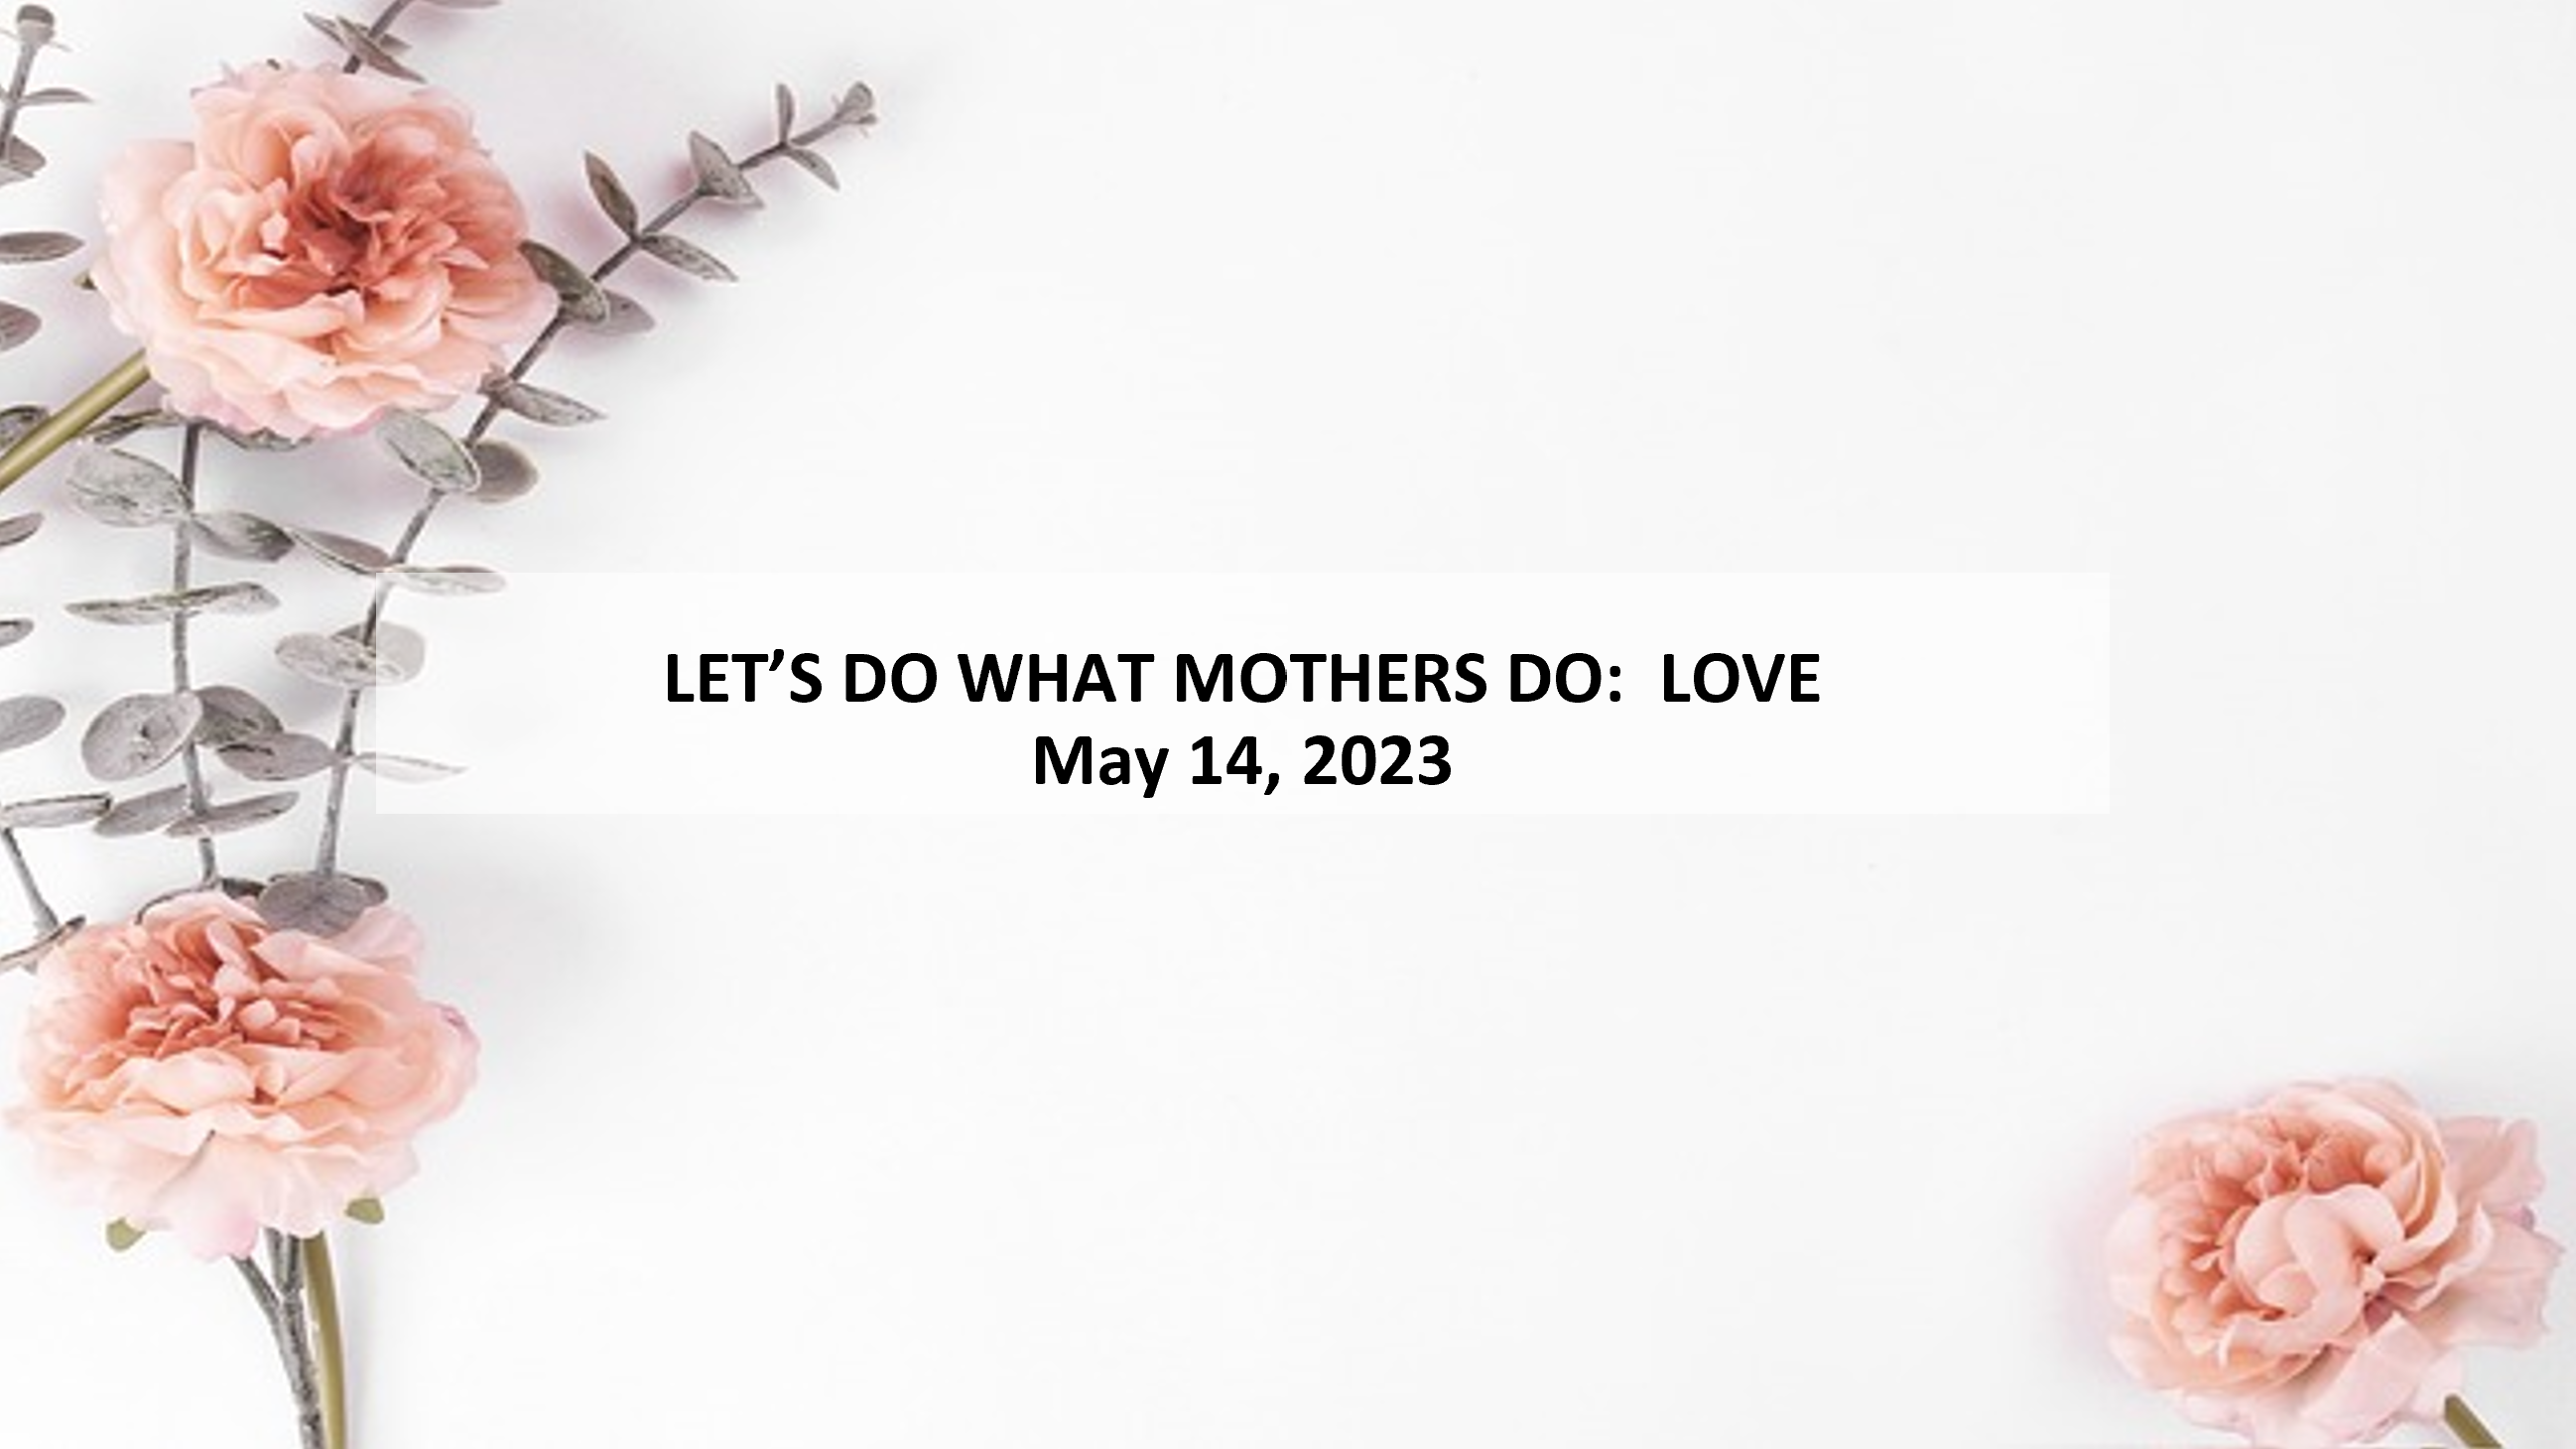 Let’s Do What Mothers Do: LOVE